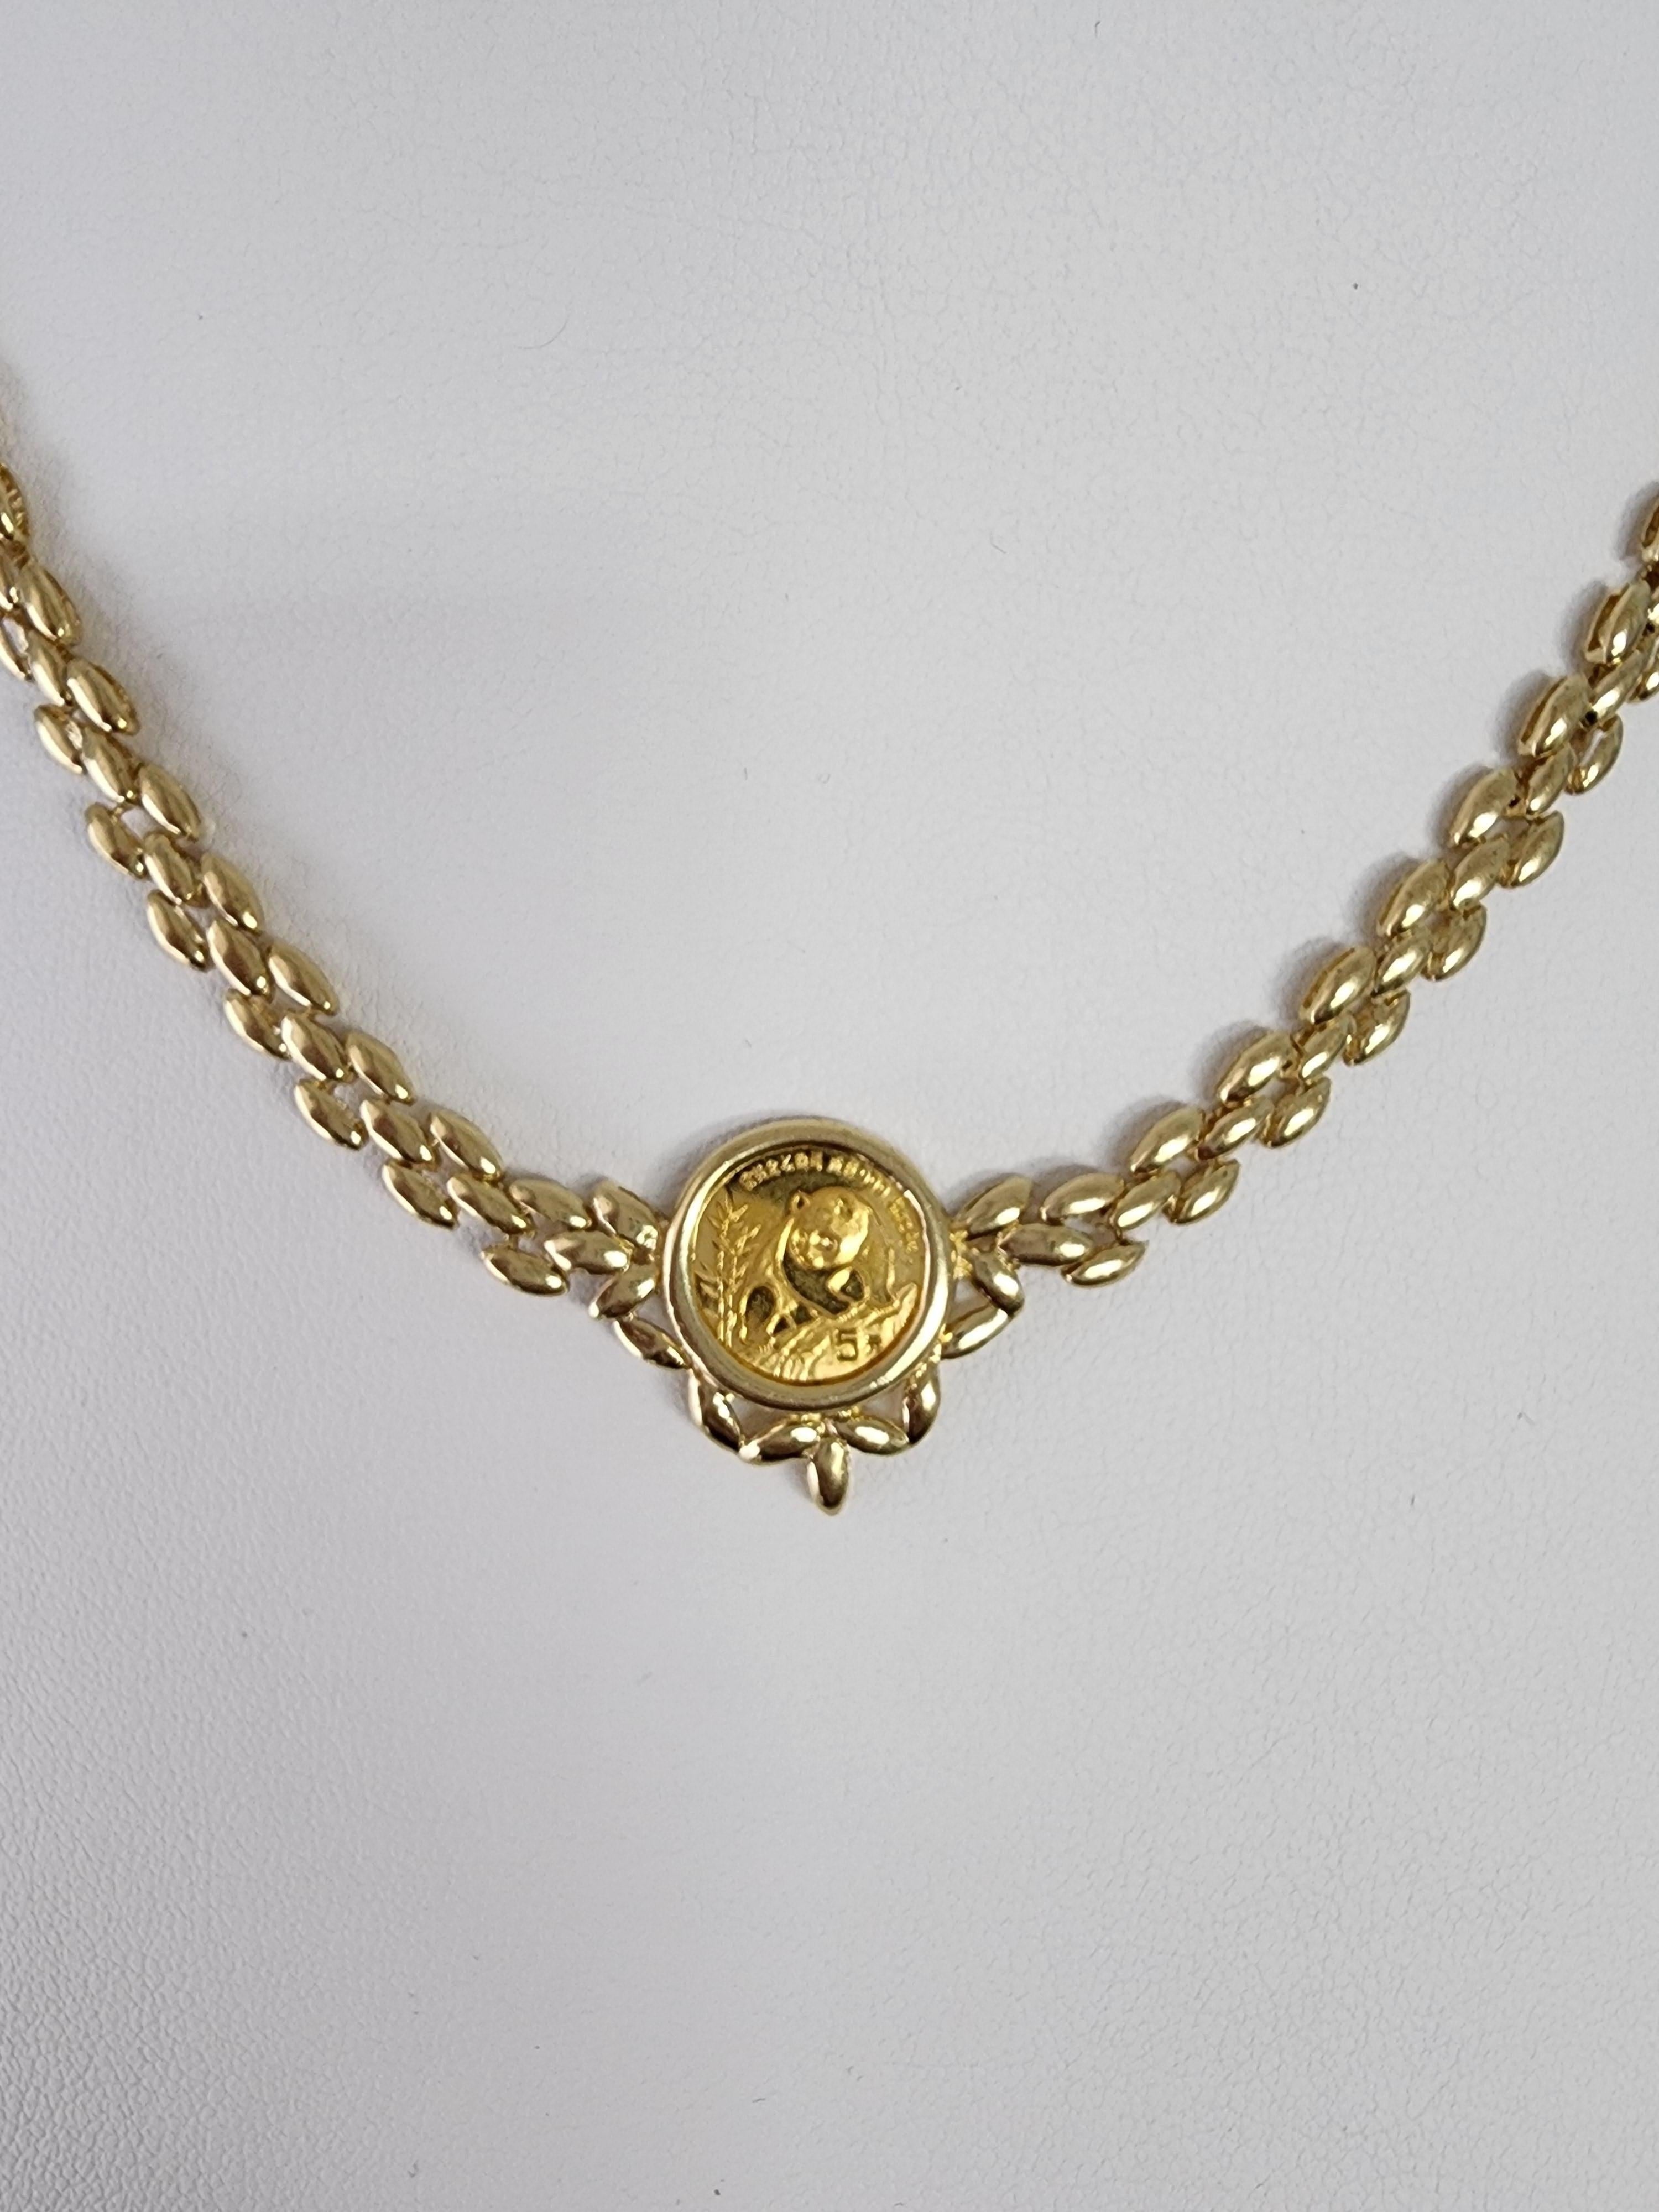 1/20OZ Panda Coin Necklace with 14k Yellow Gold Polished Link Chain- signet pend In New Condition For Sale In Sugar Land, TX